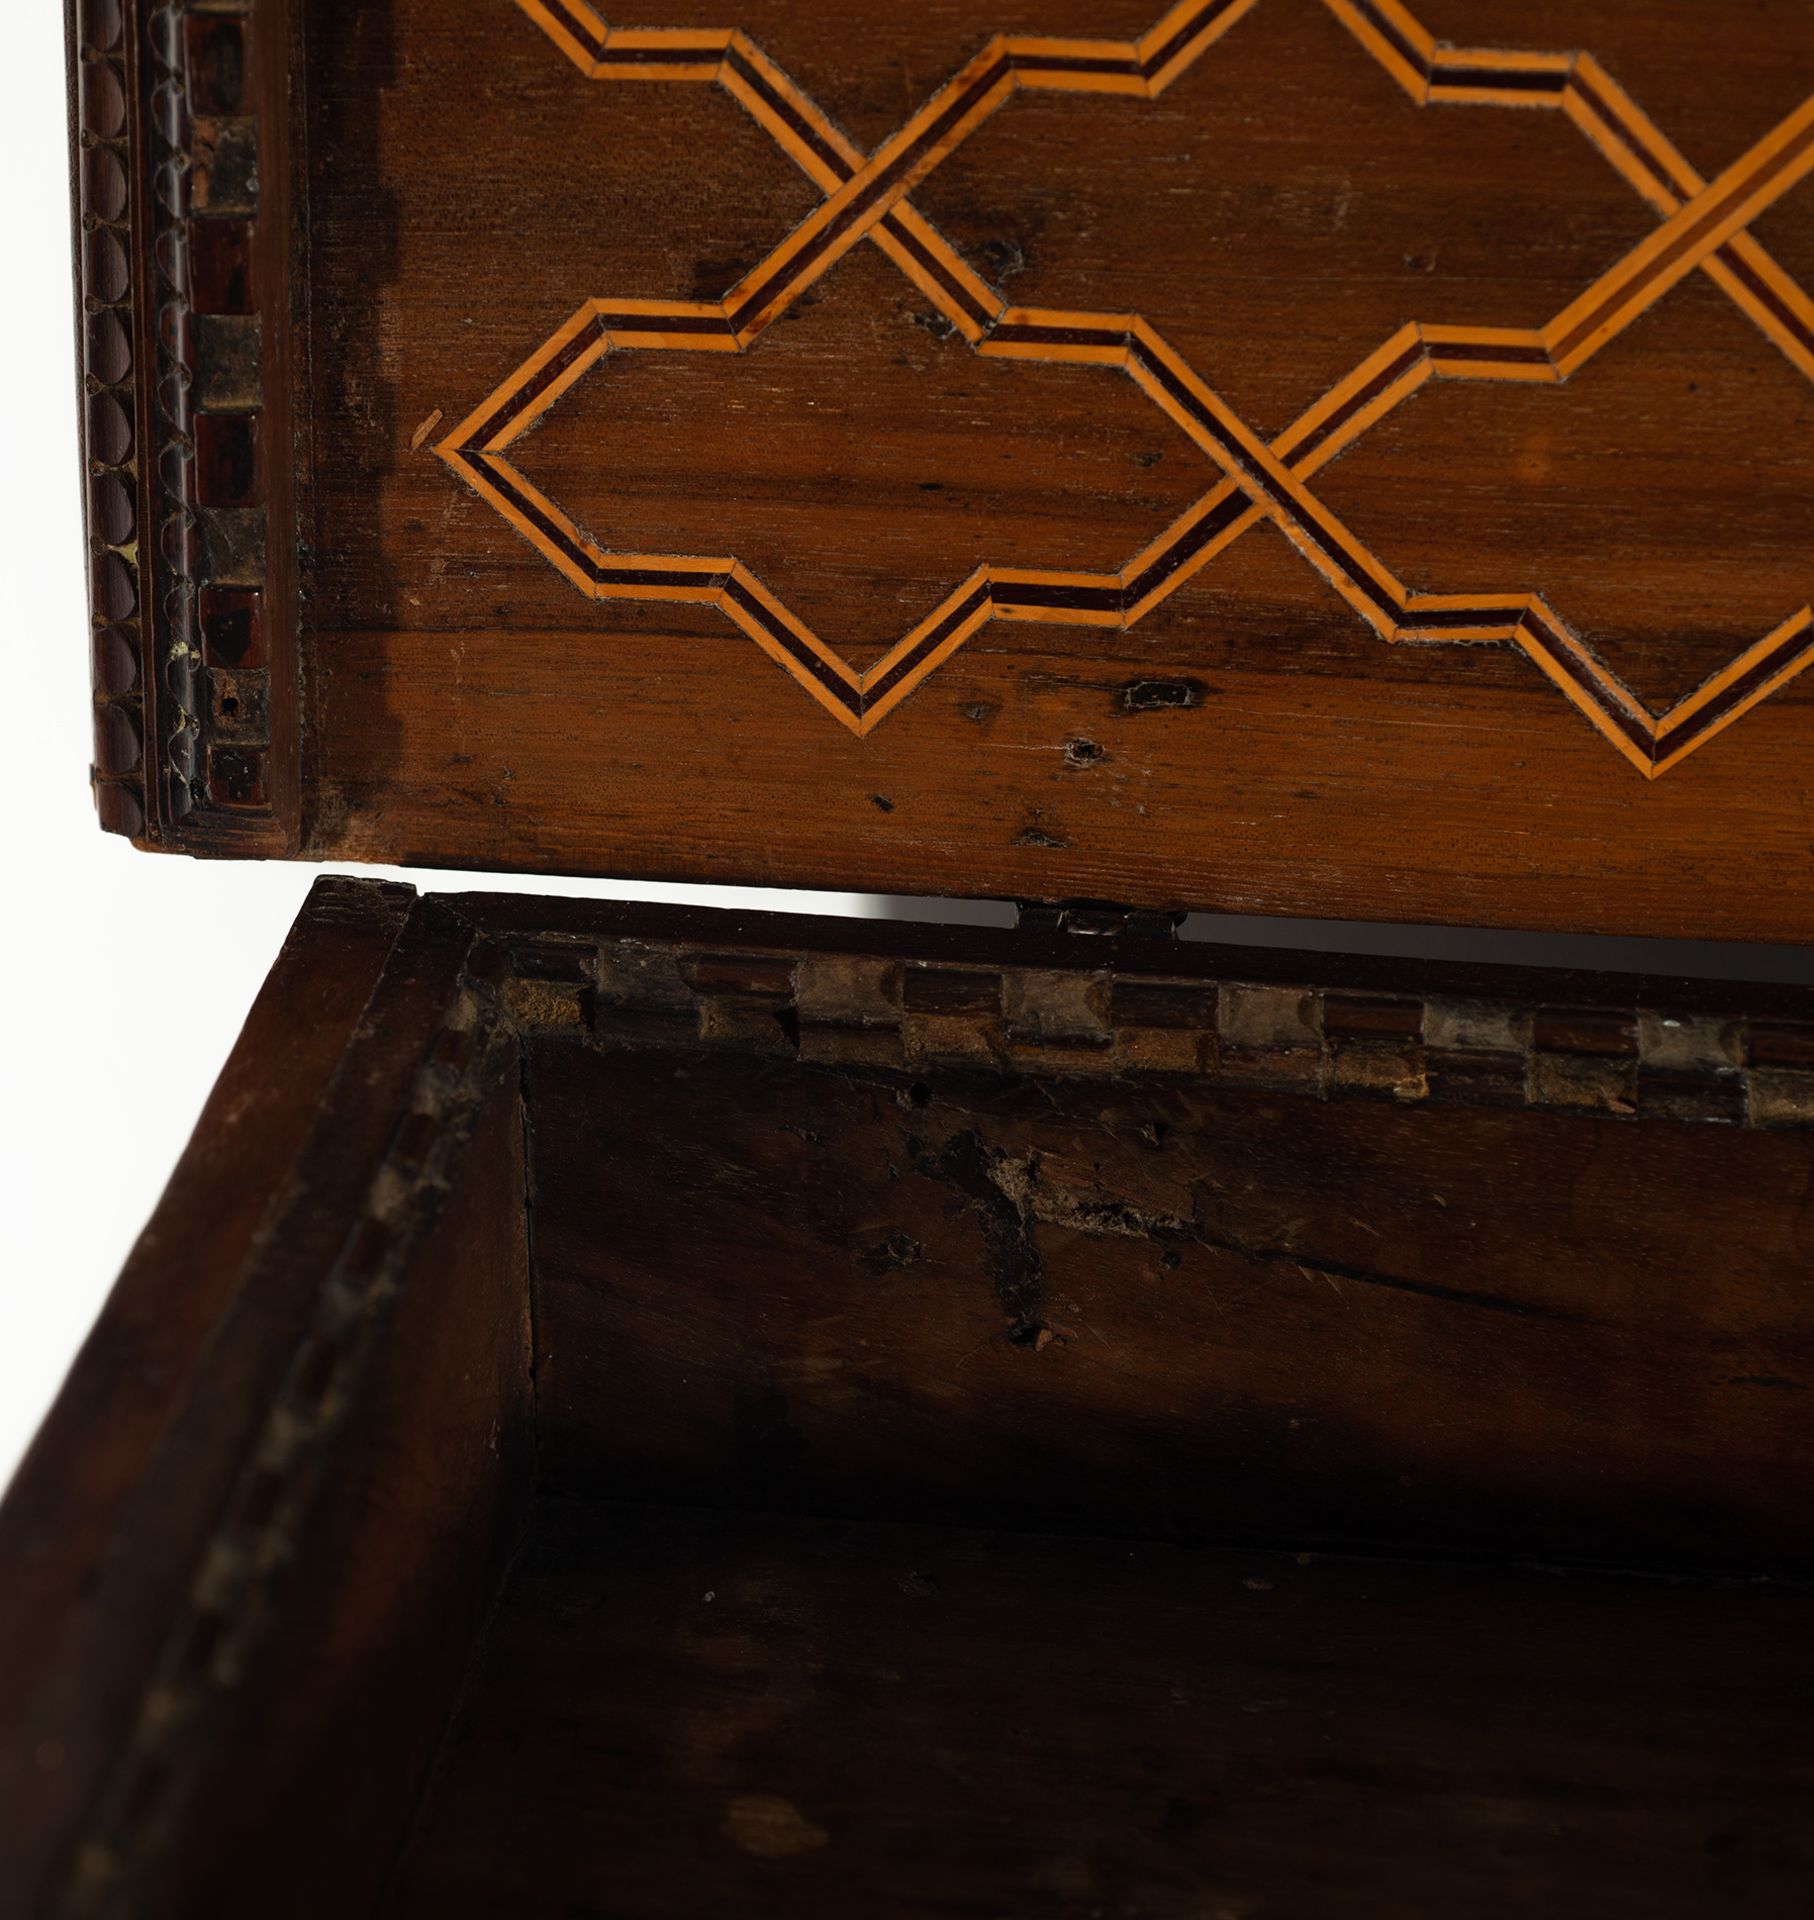 Exceptional plateresque chest in fruit wood, boxwood and marquetry, Spanish Renaissance, mid-16th ce - Image 13 of 13